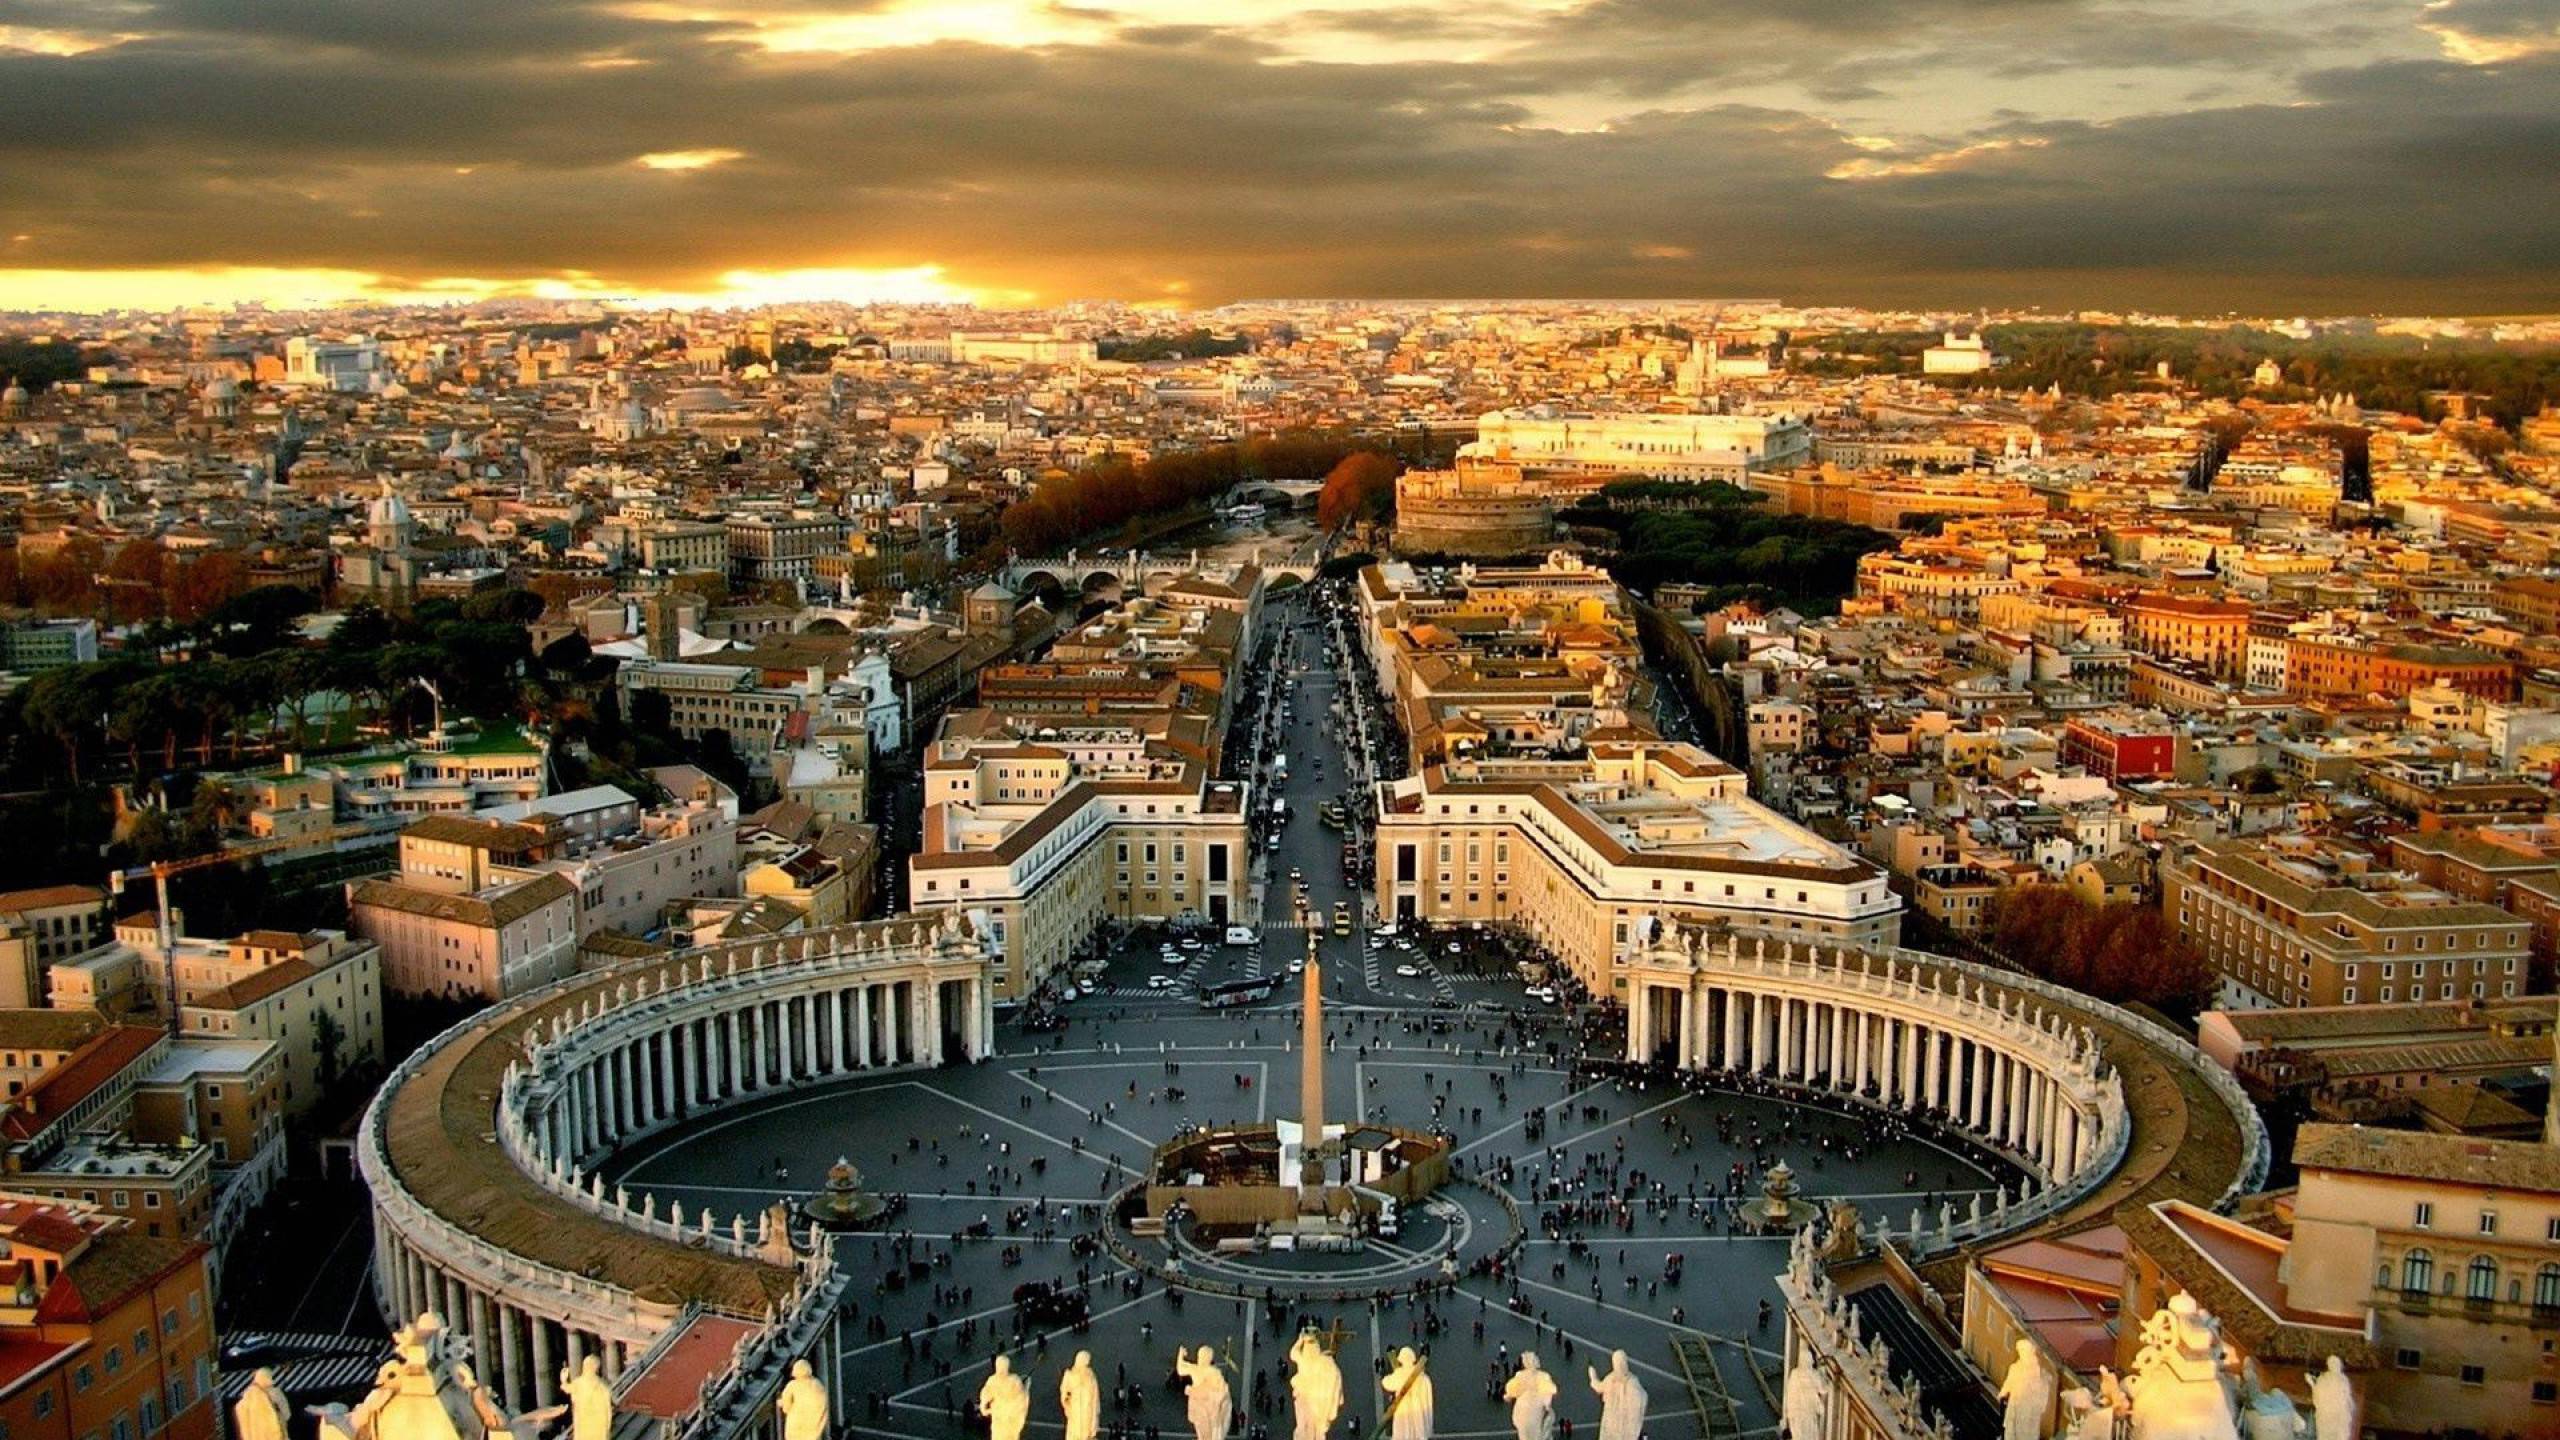 High Resolution Wallpapers City Wallpapers - Vatican City A Country - HD Wallpaper 